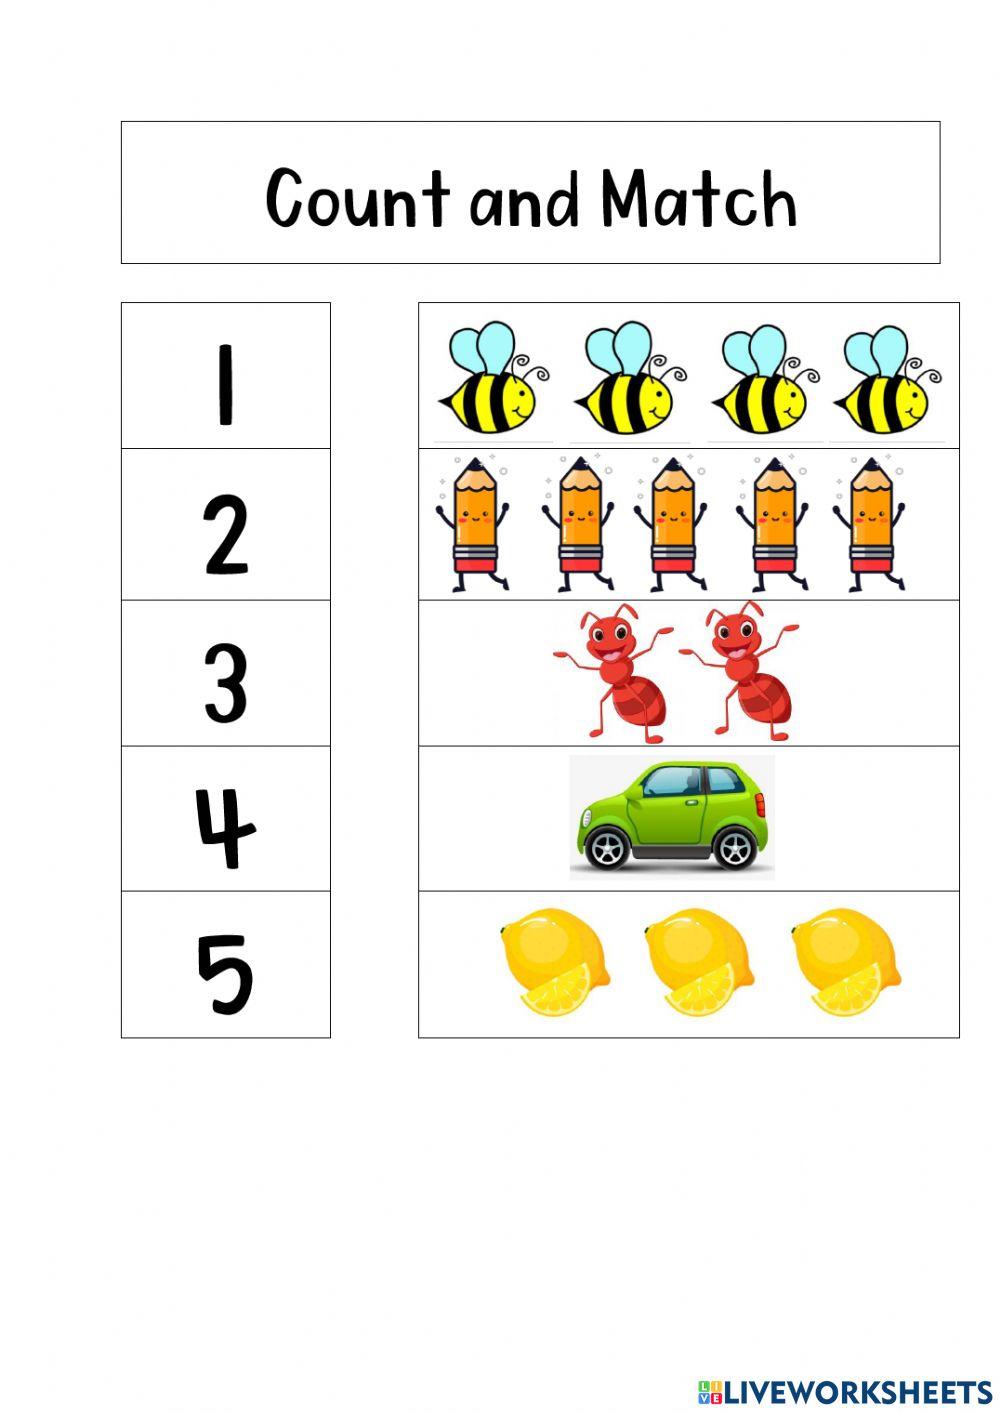 Count and Match 1 - 5